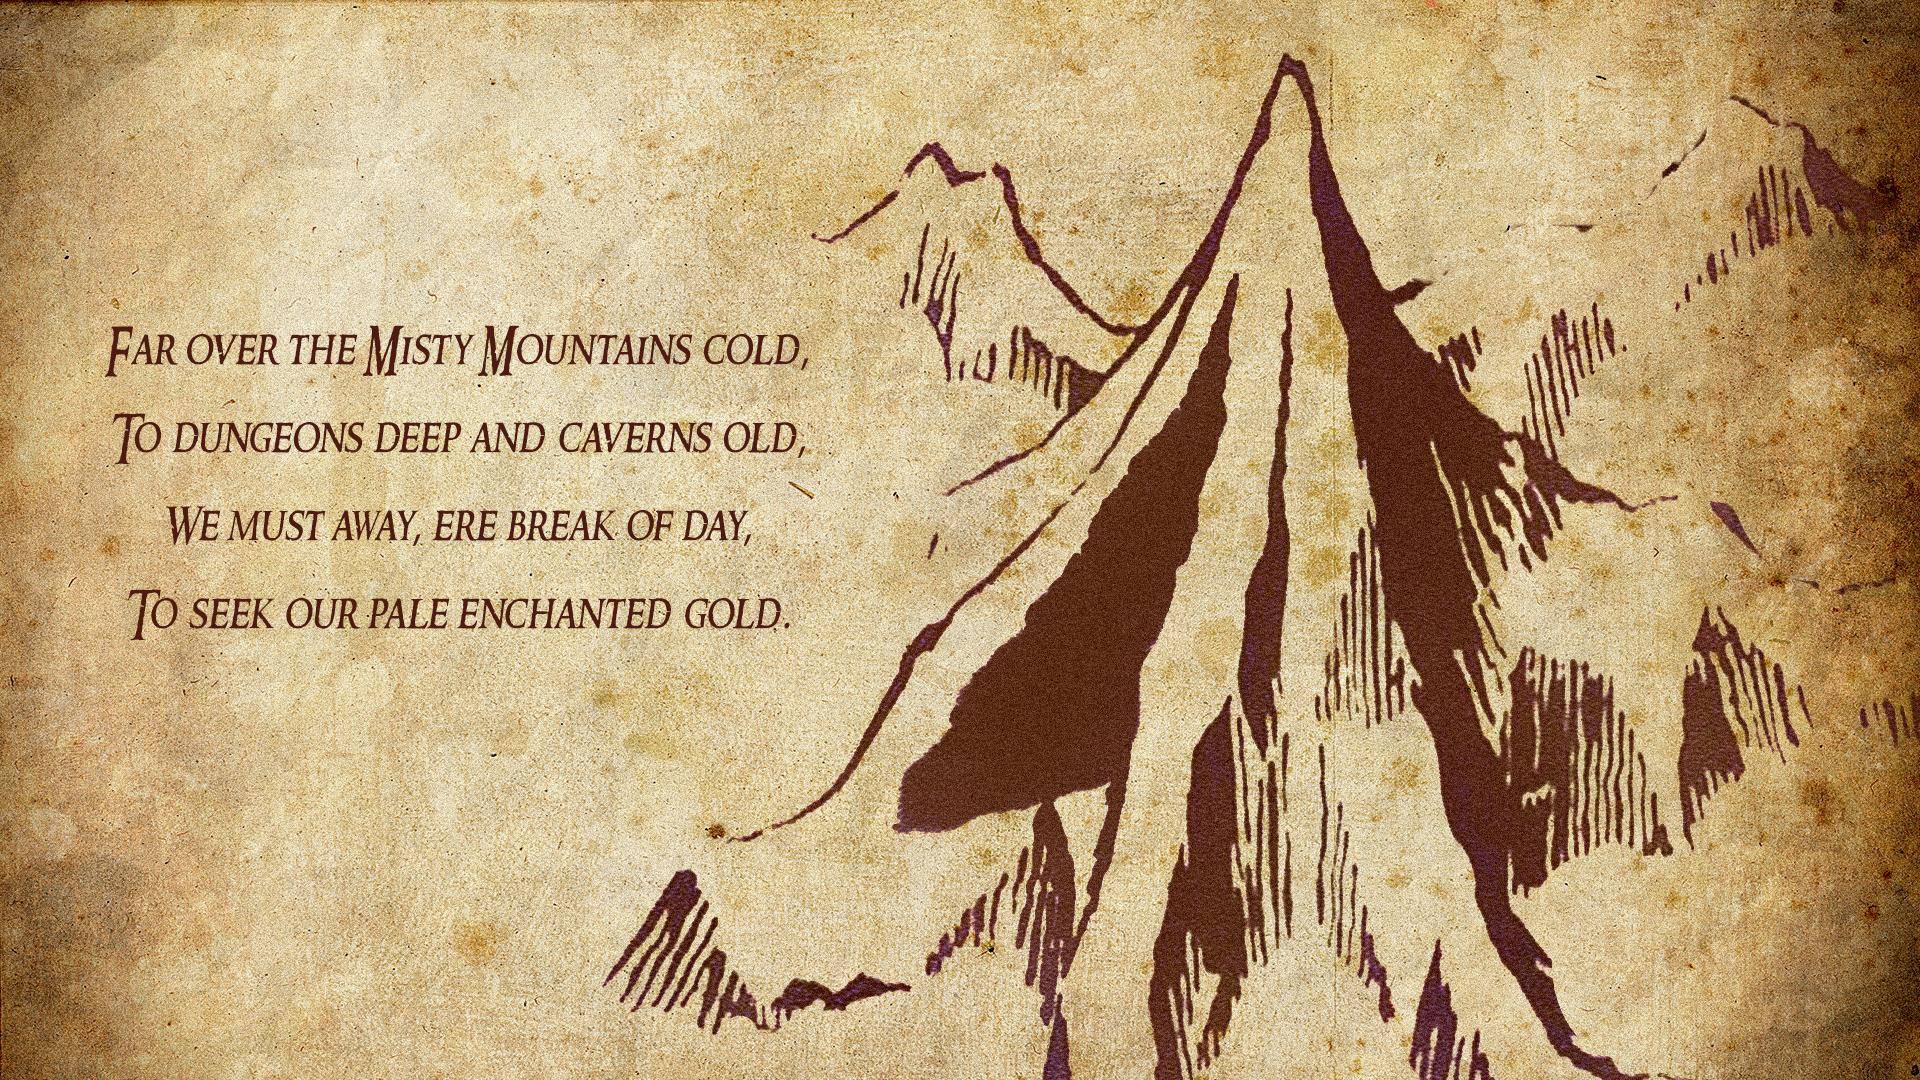 A Lonely Mountain Wallpaper I Made For R Wallpaper Yesterday